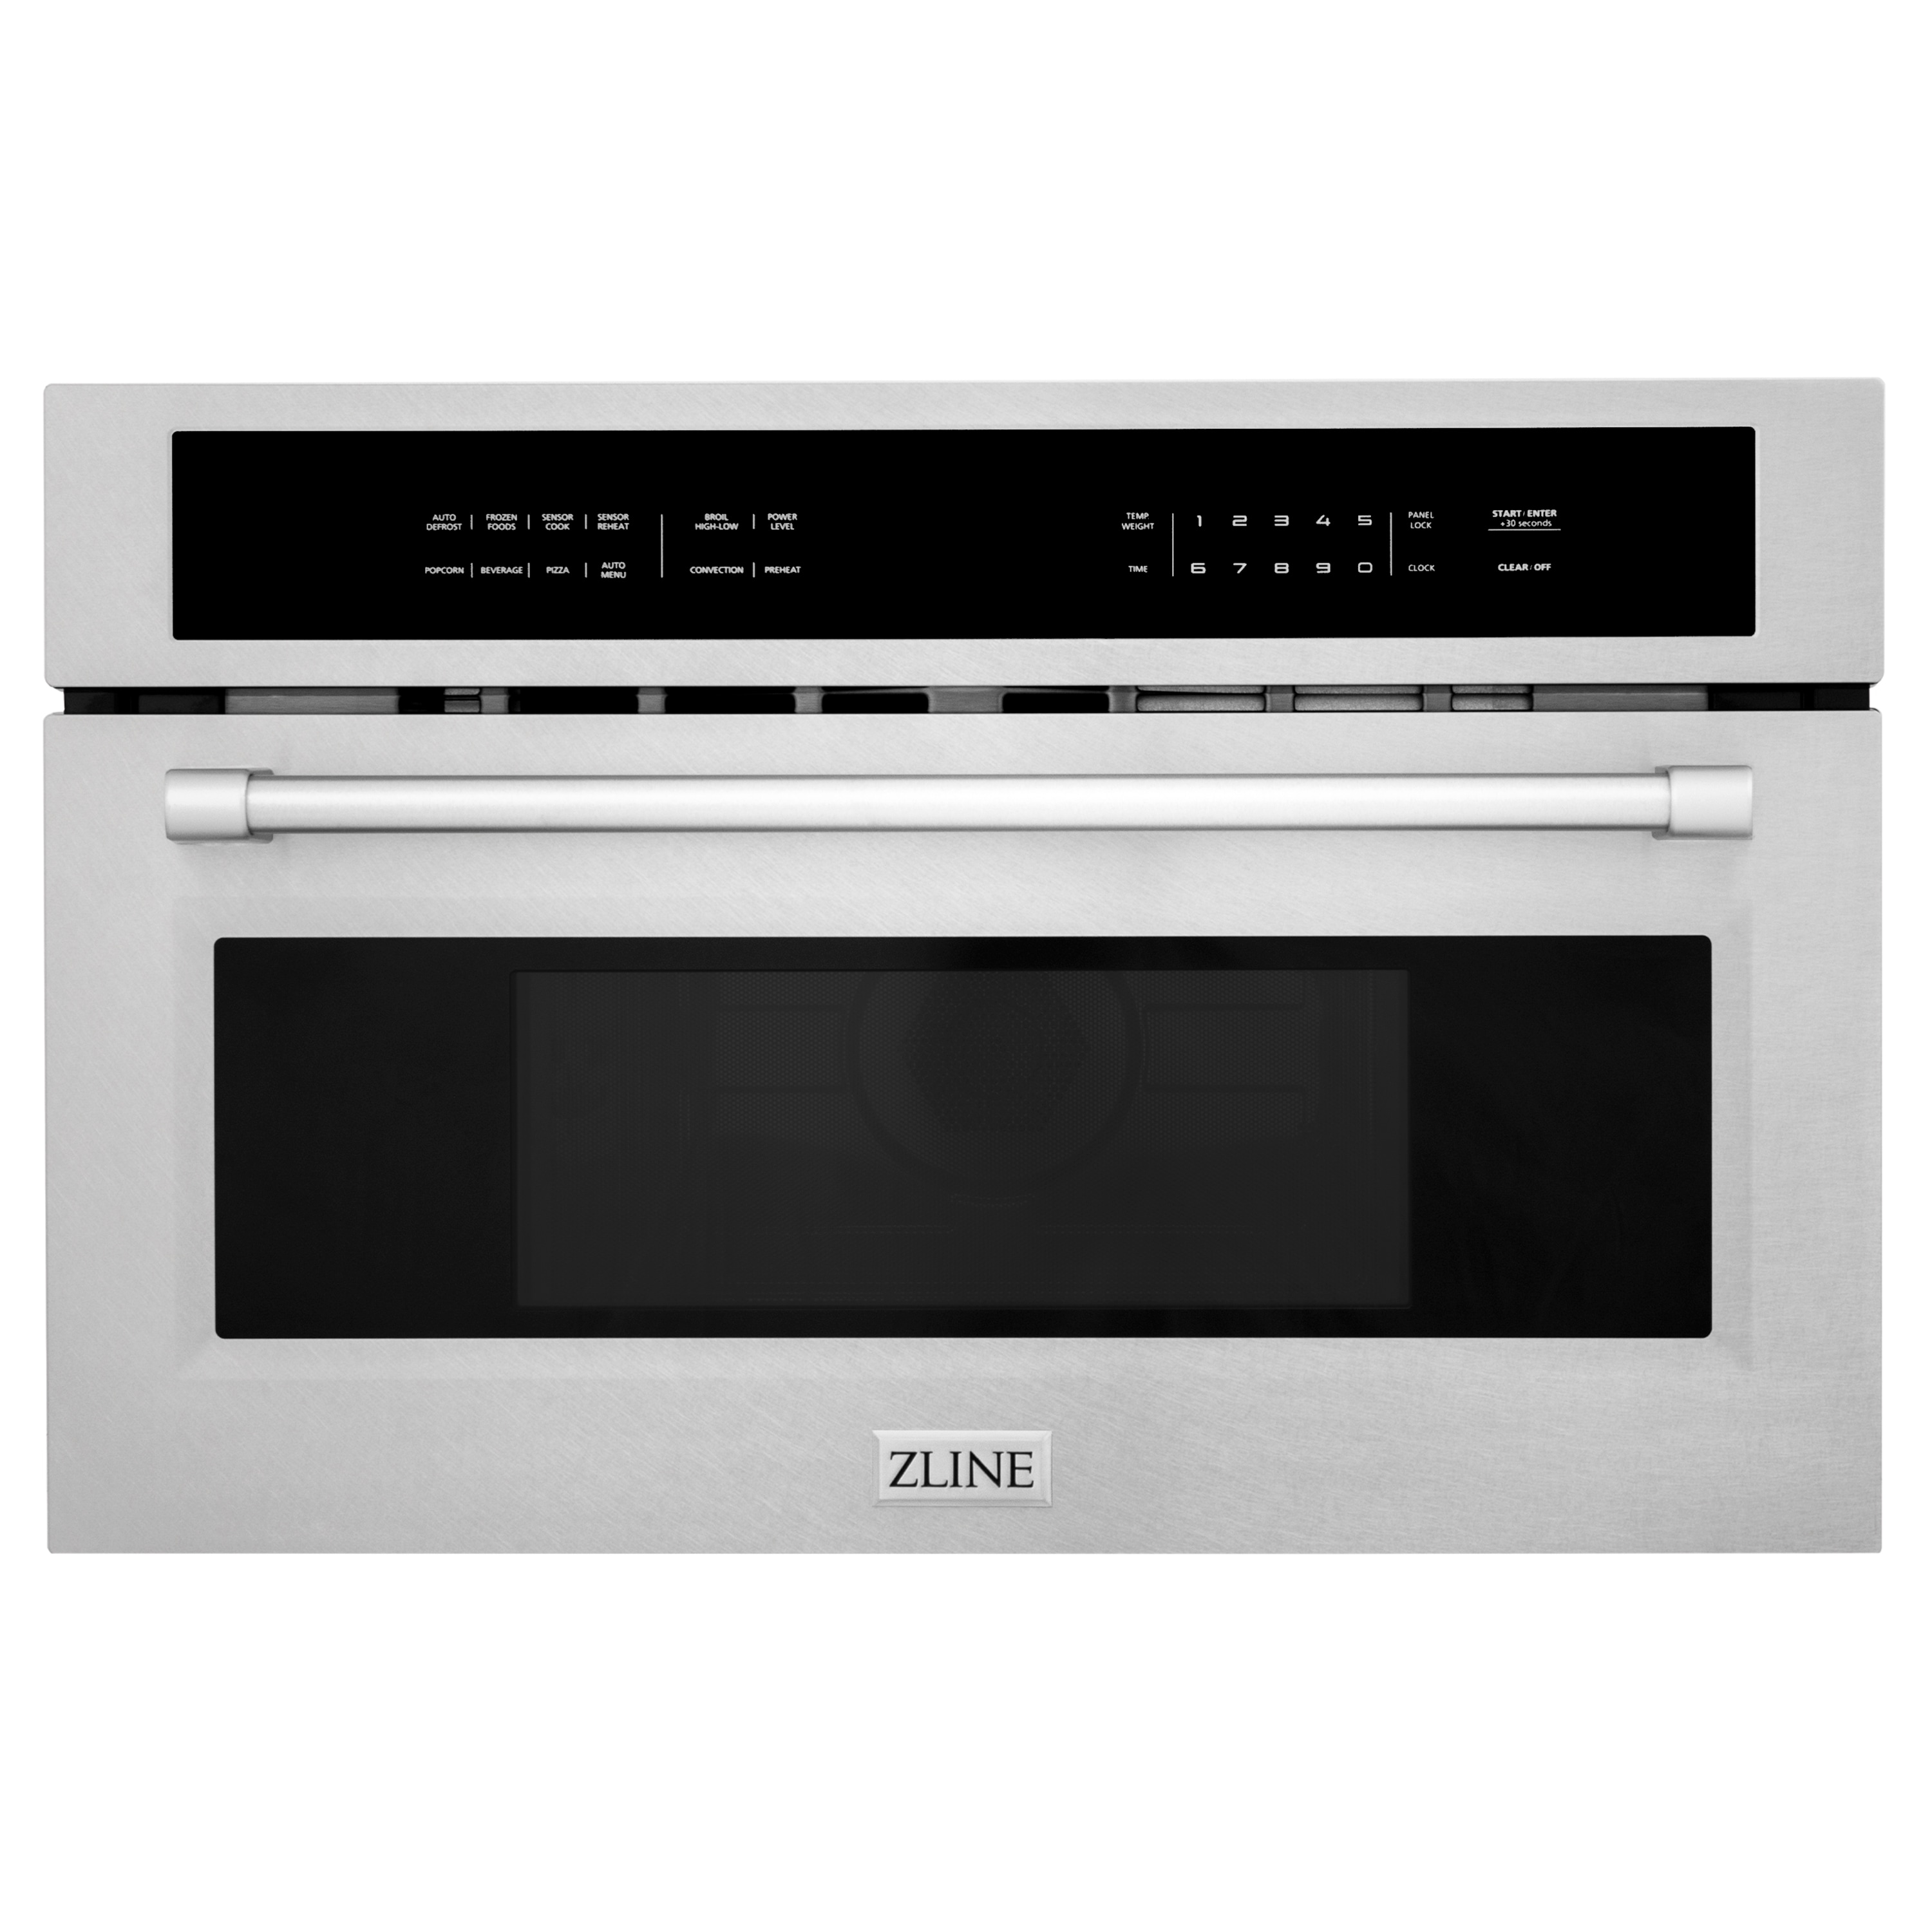 ZLINE KITCHEN & BATH Microwave Oven 1.6-cu 1000-Watt Built-In Microwave with Sensor Cooking Controls and Cook Resistant Stainless Steel) in the Built-In Microwaves department at Lowes.com